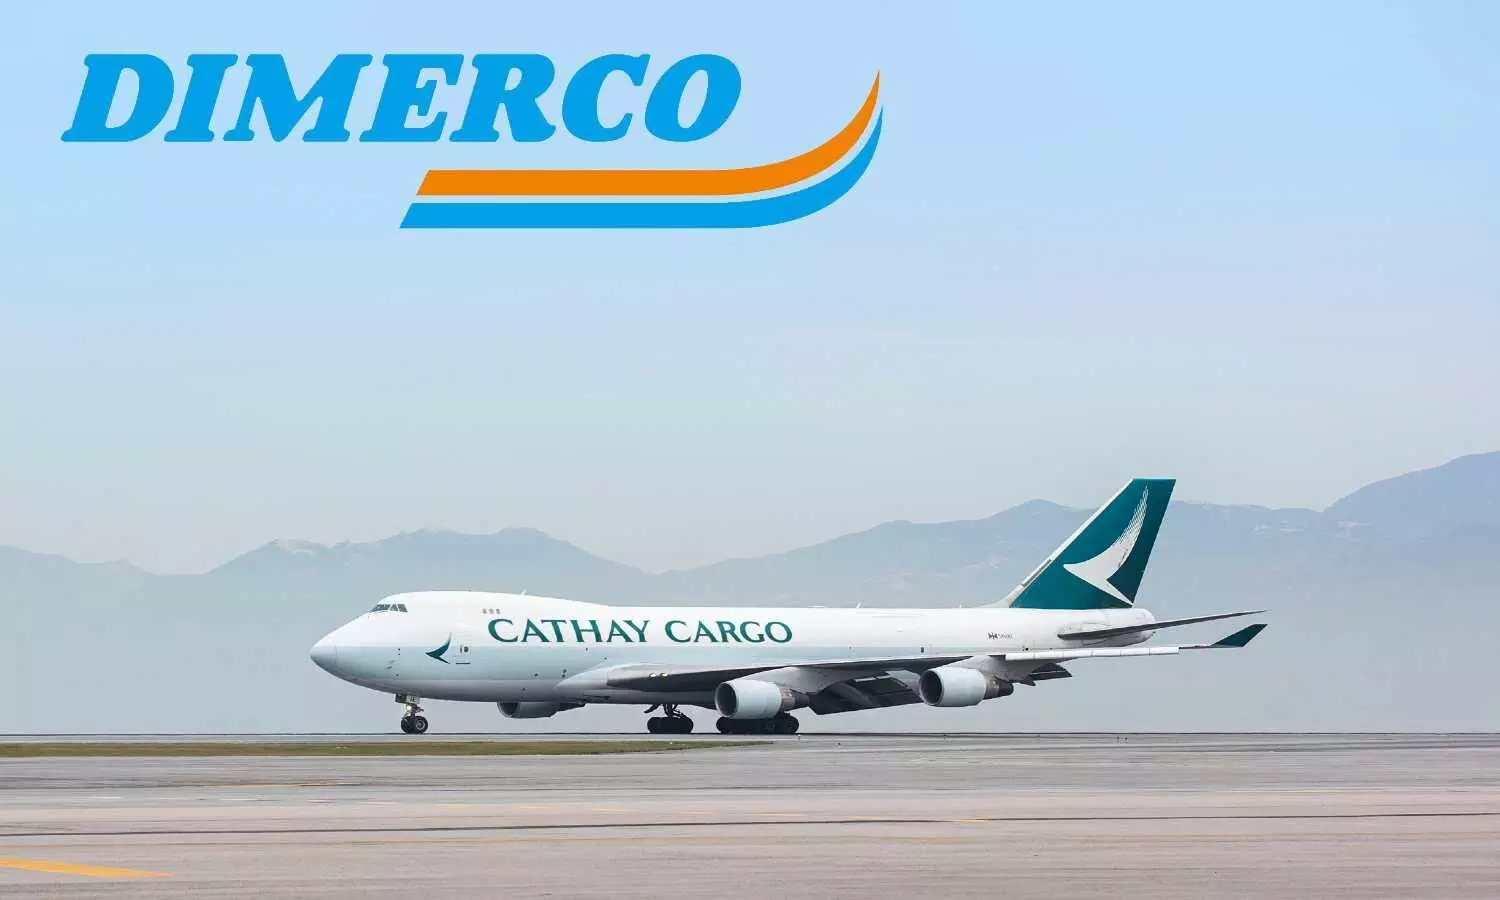 Dimerco, Cathay Cargo trial multimodal logistics solutions